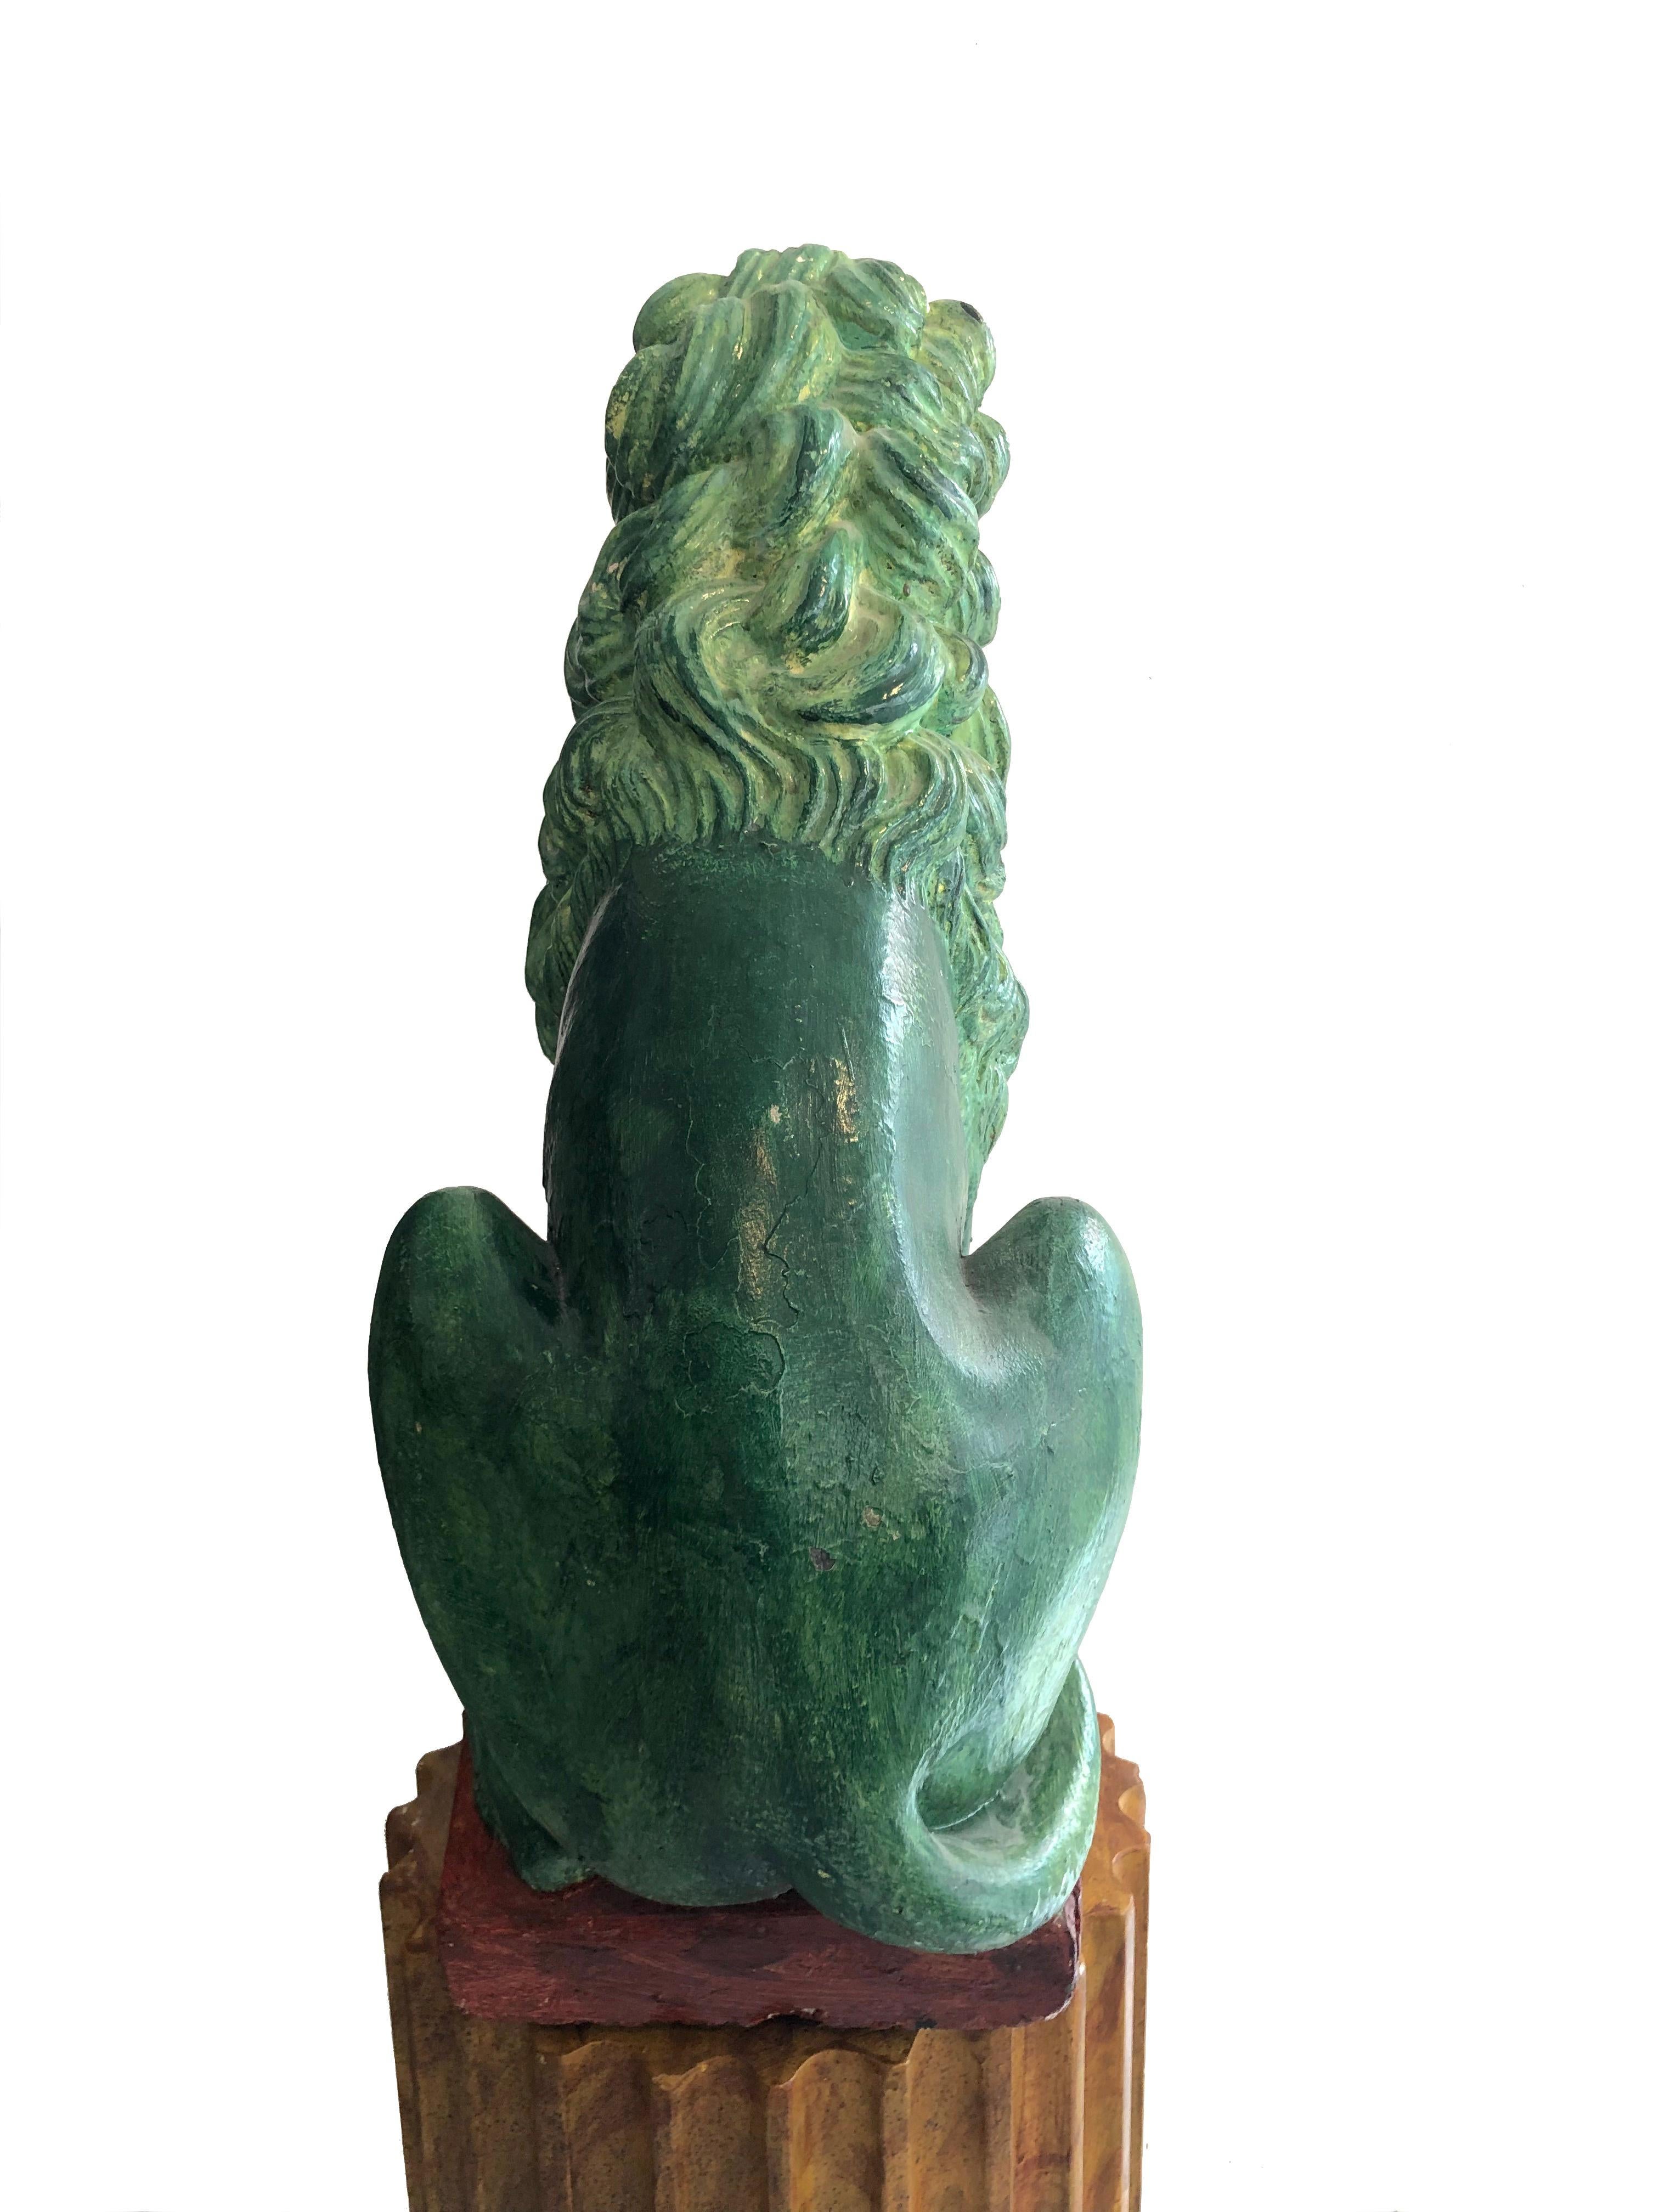 Early 20th Century Pair of Antique Green Chinese Stone Cast Lions Sculptures Garden Ornaments